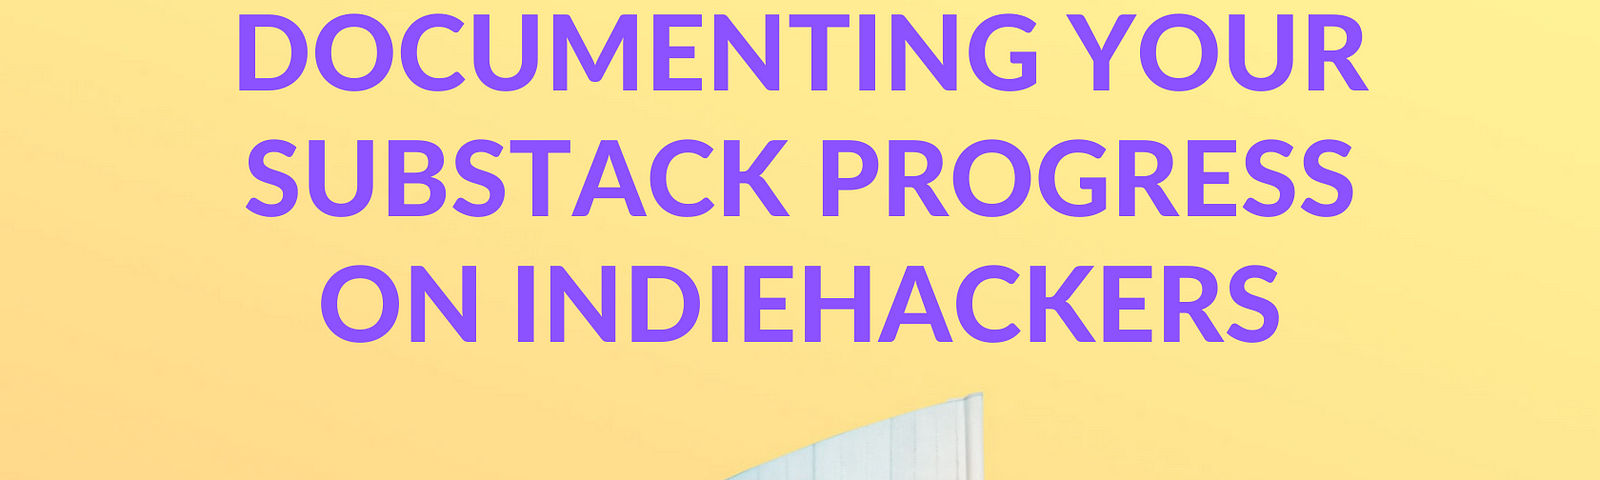 substack newsletter, substack review, substack threads, substack pricing, substack embed podcast, indiehackers substack